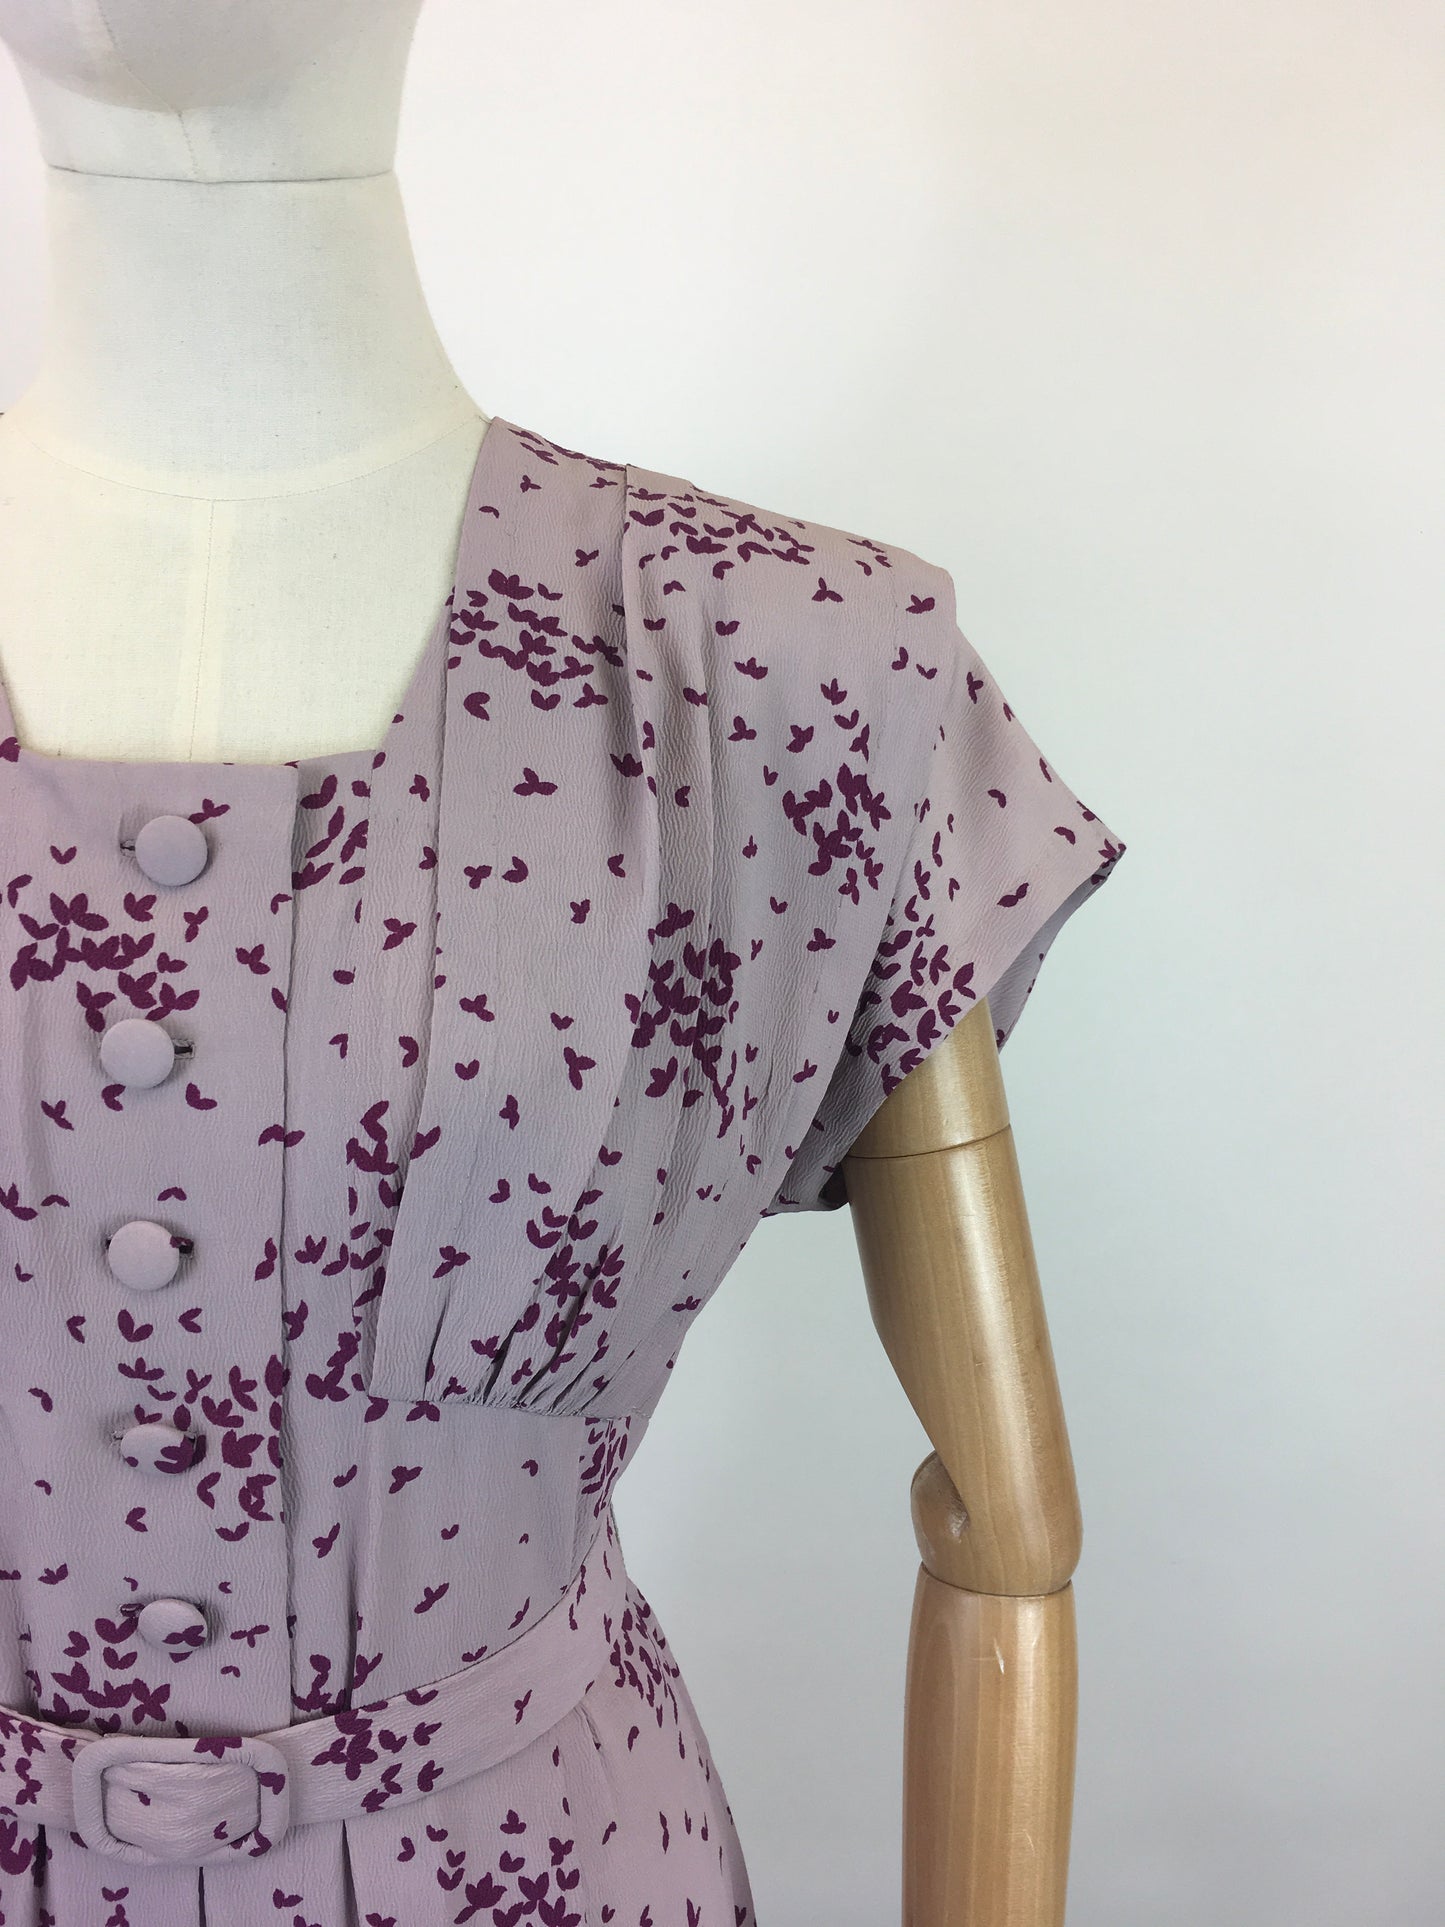 Original 1940's Darling Crepe Dress - In A Delicate Lilac with Berry Coloured Print